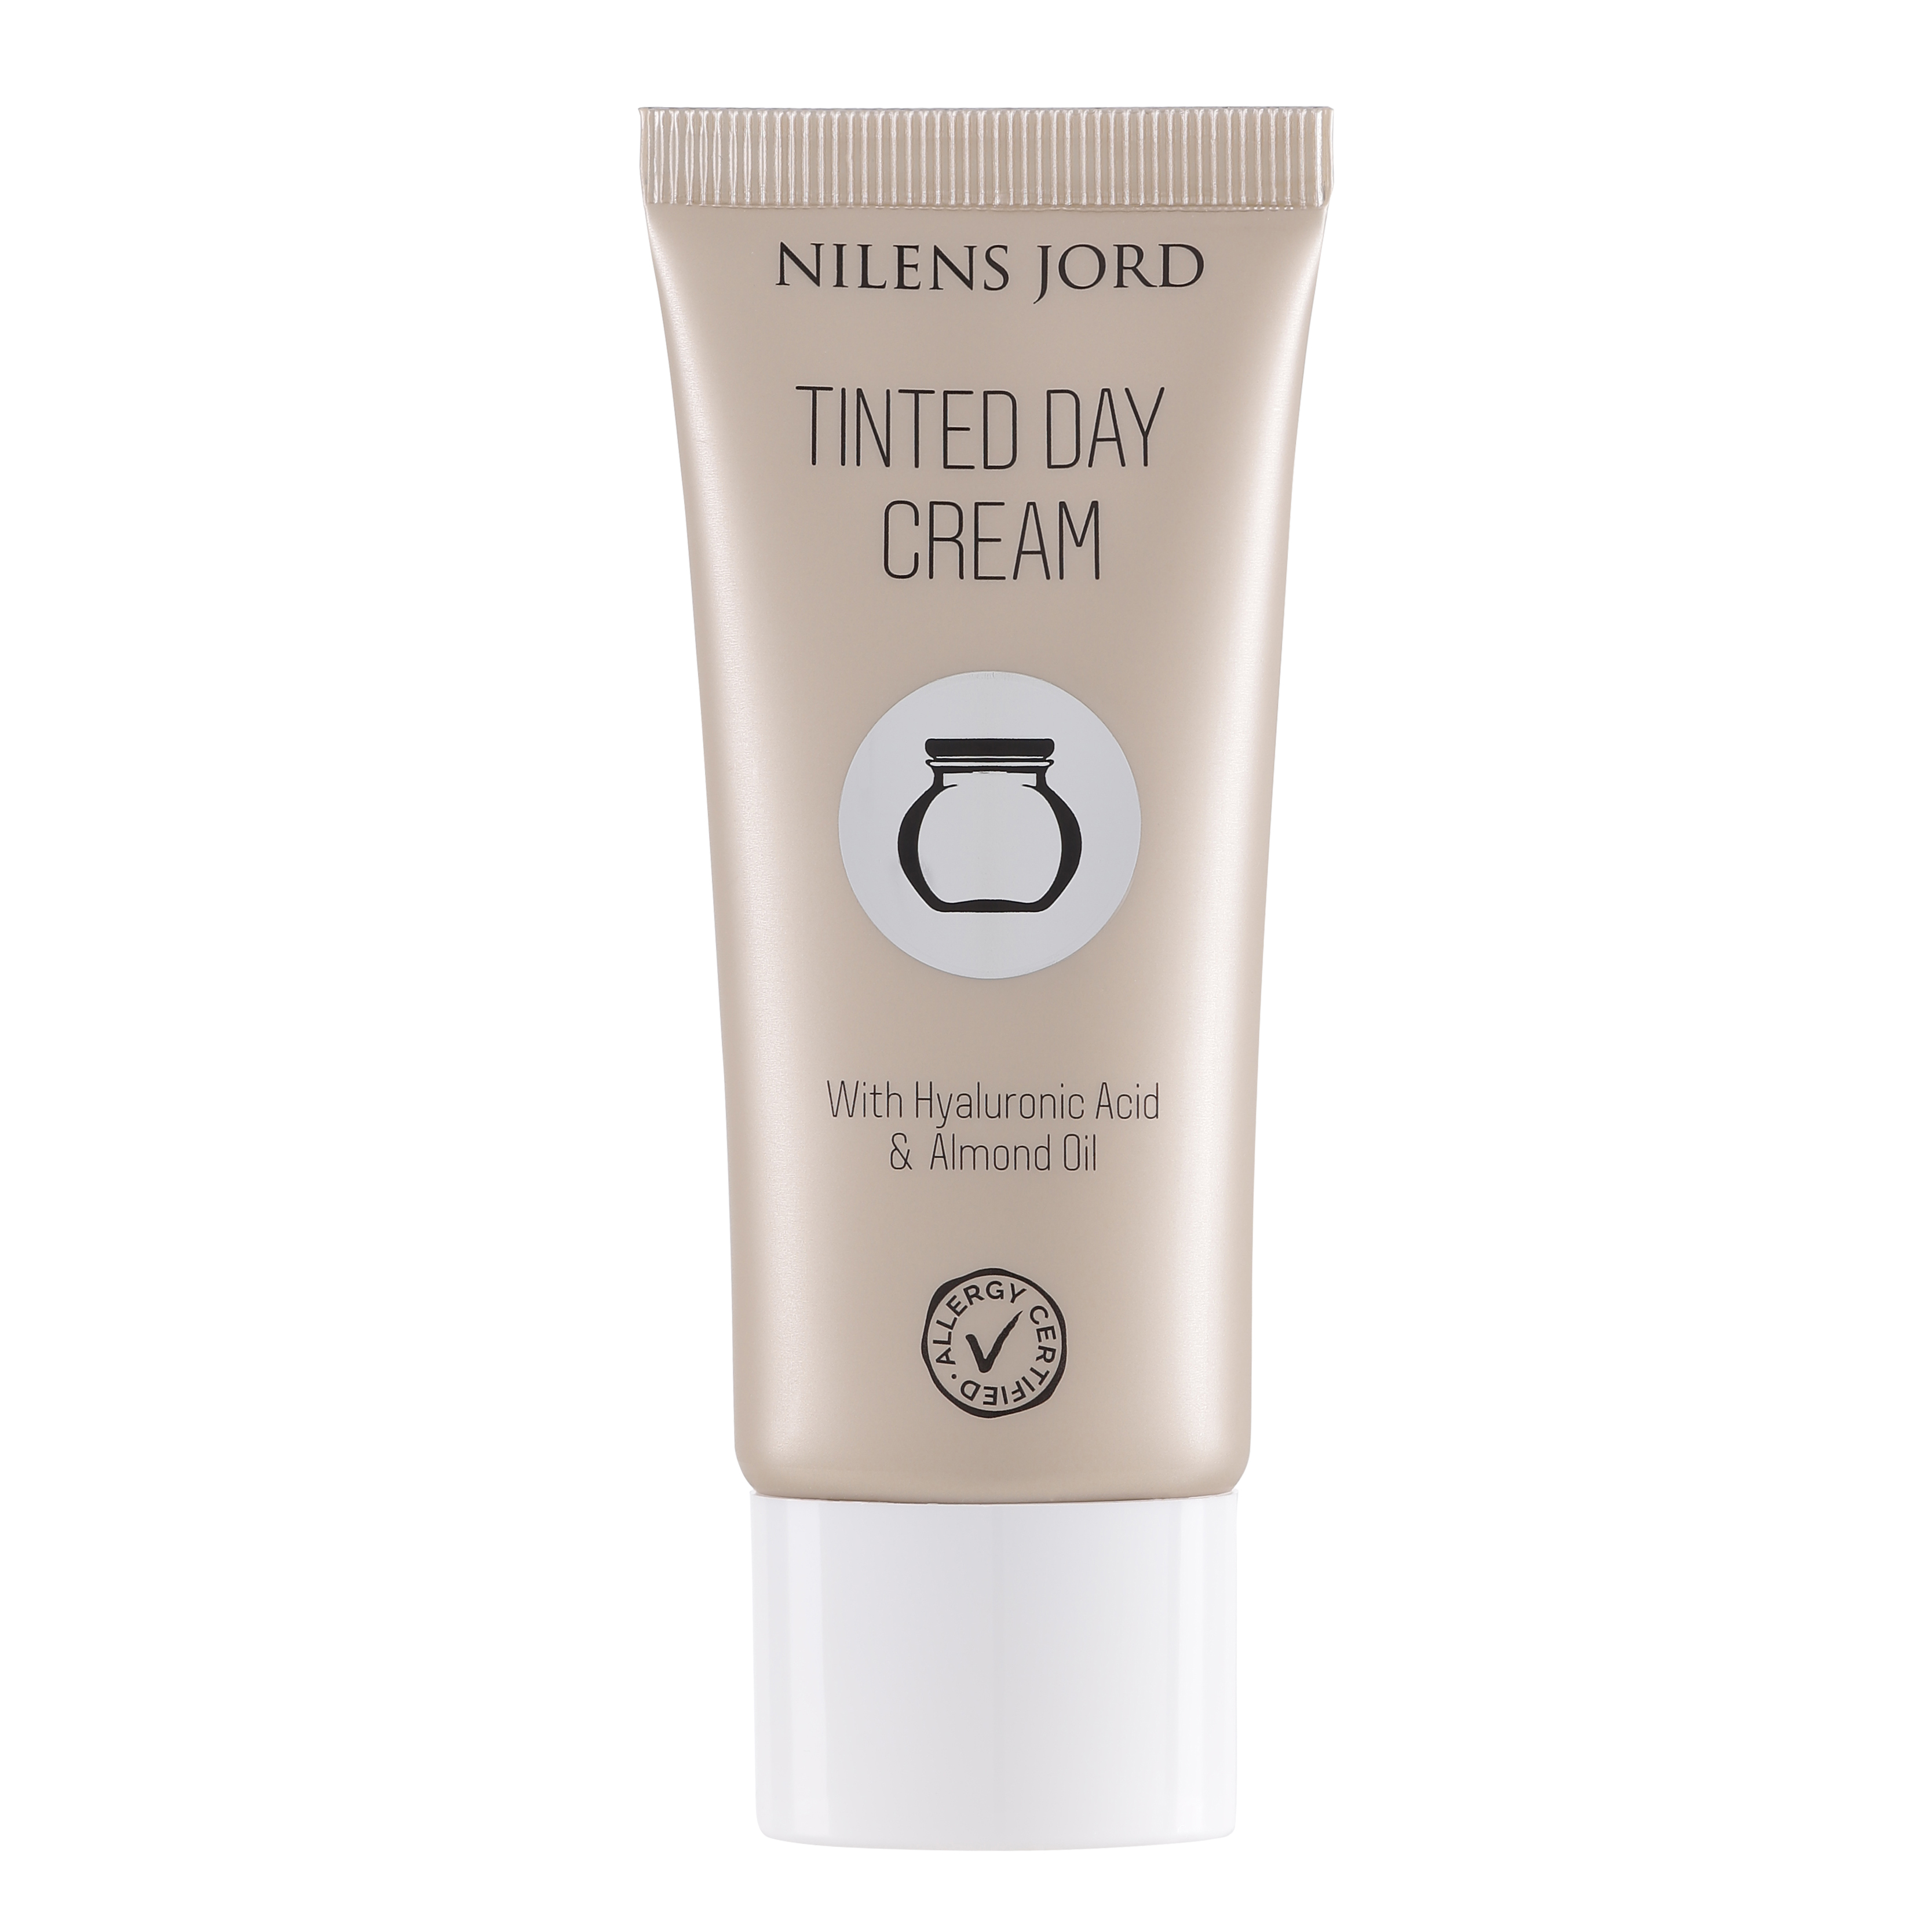  Tinted Day Cream, 430 Noon